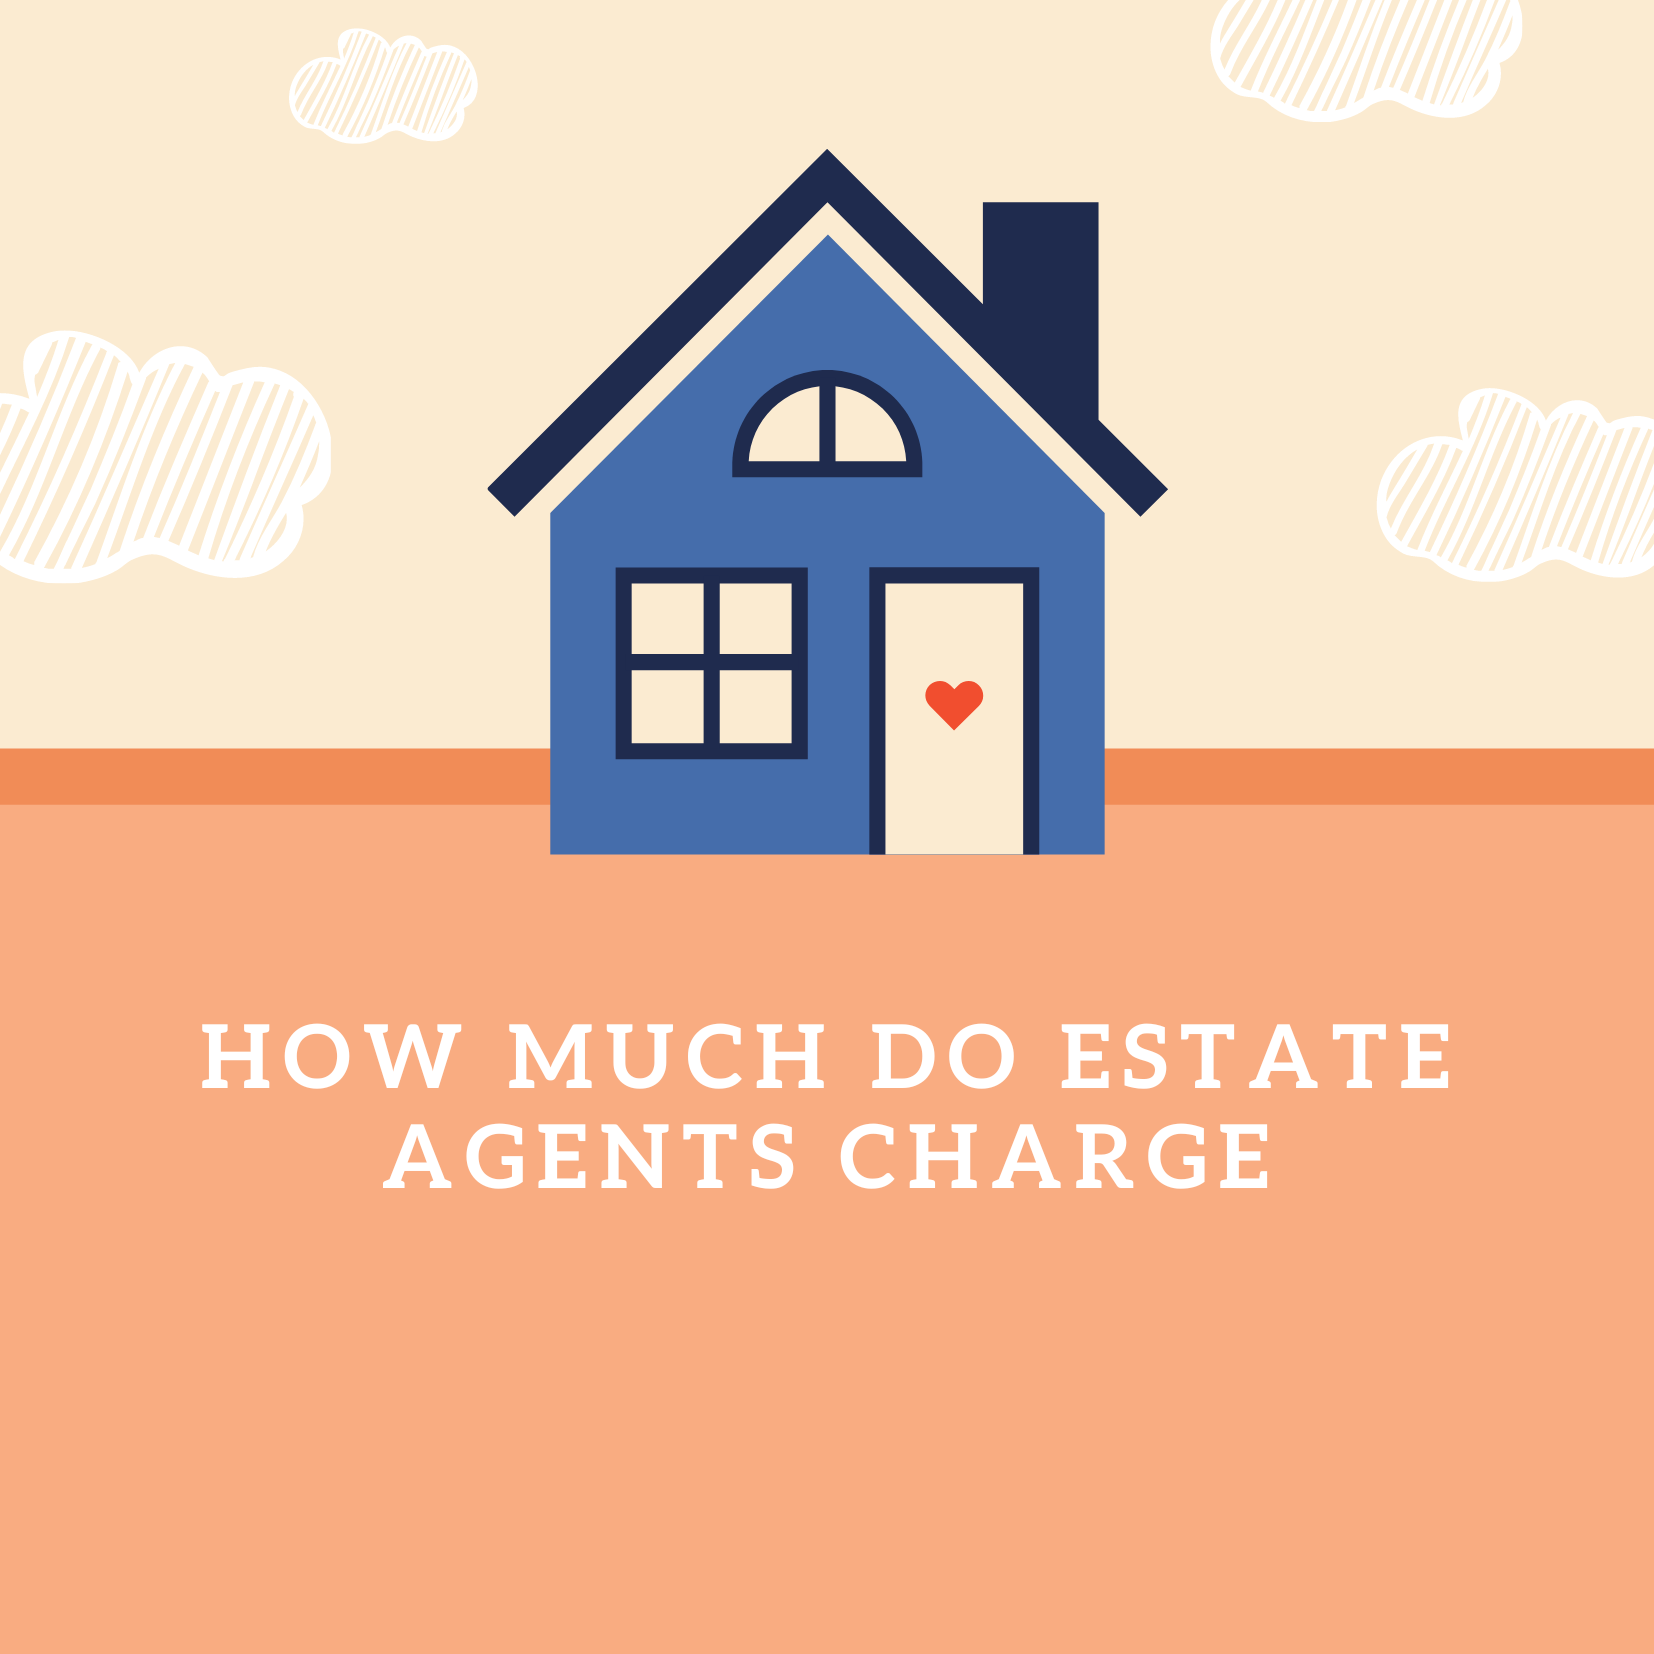 How much do estate agents charge?